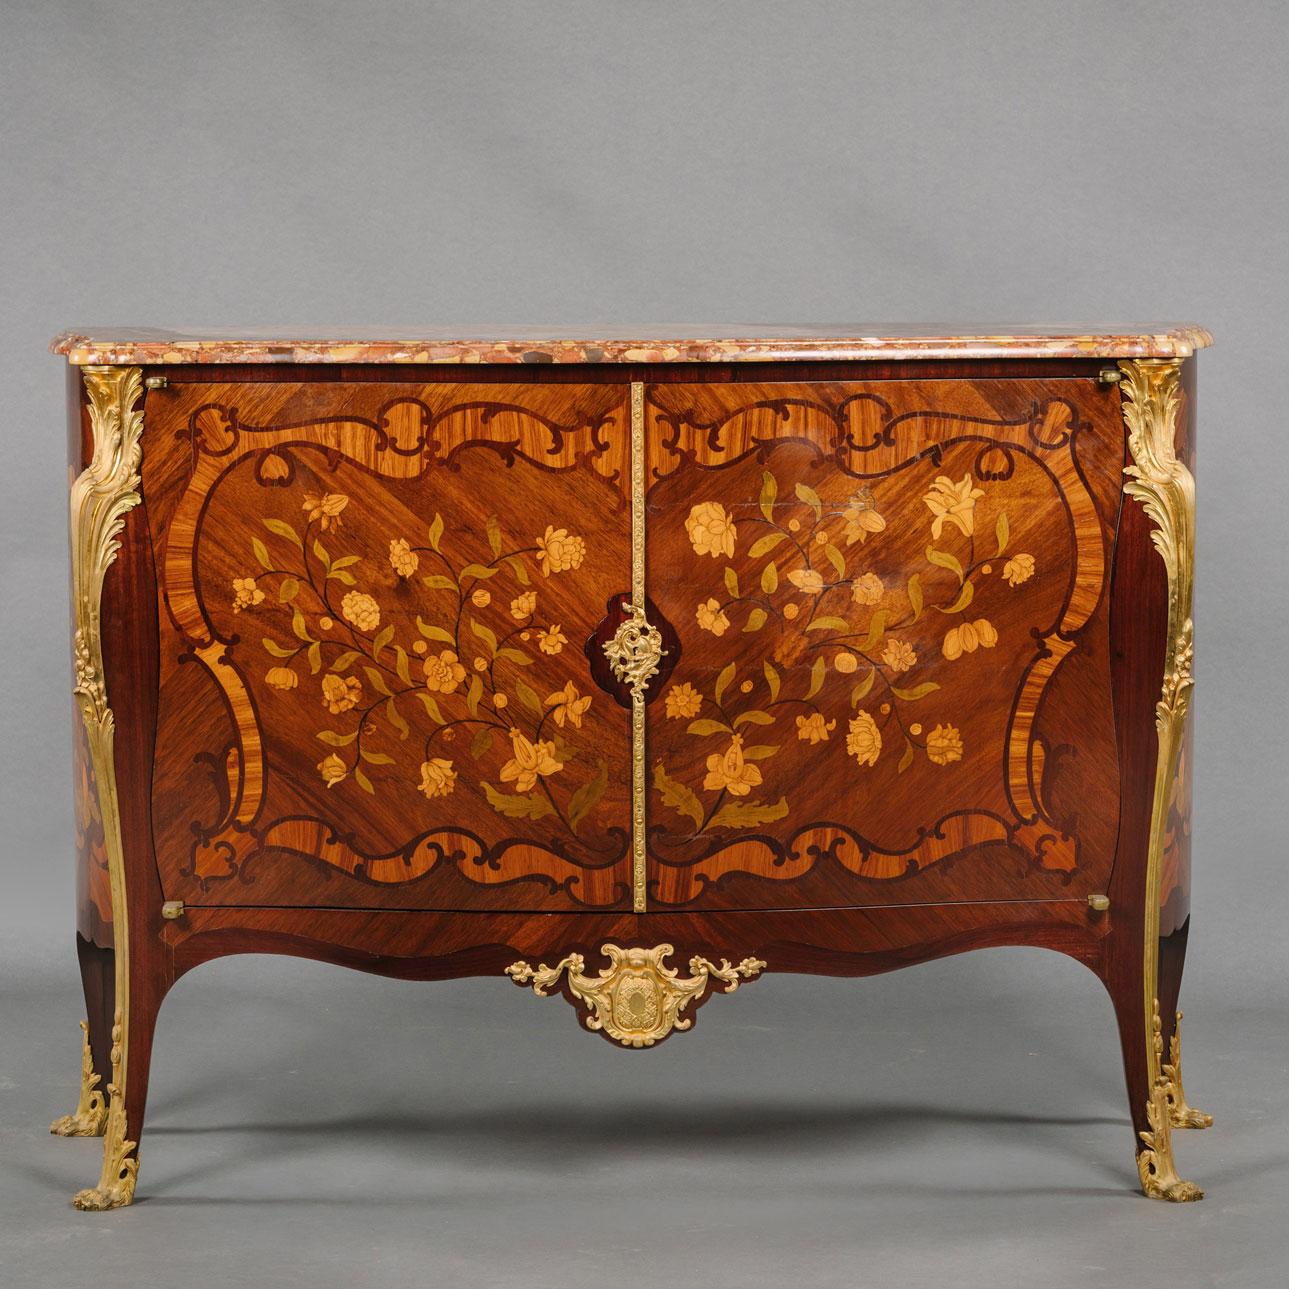 A fine Louis XV style gilt-bronze Mounted Marquetry inlaid commode by Gervais Maximilien Eugène Durand.

Stamped to the carcass beneath the marble top 'G. DURAND'. 

This fine commode has a serpentine-shaped brêche d'Alep marble top above a pair